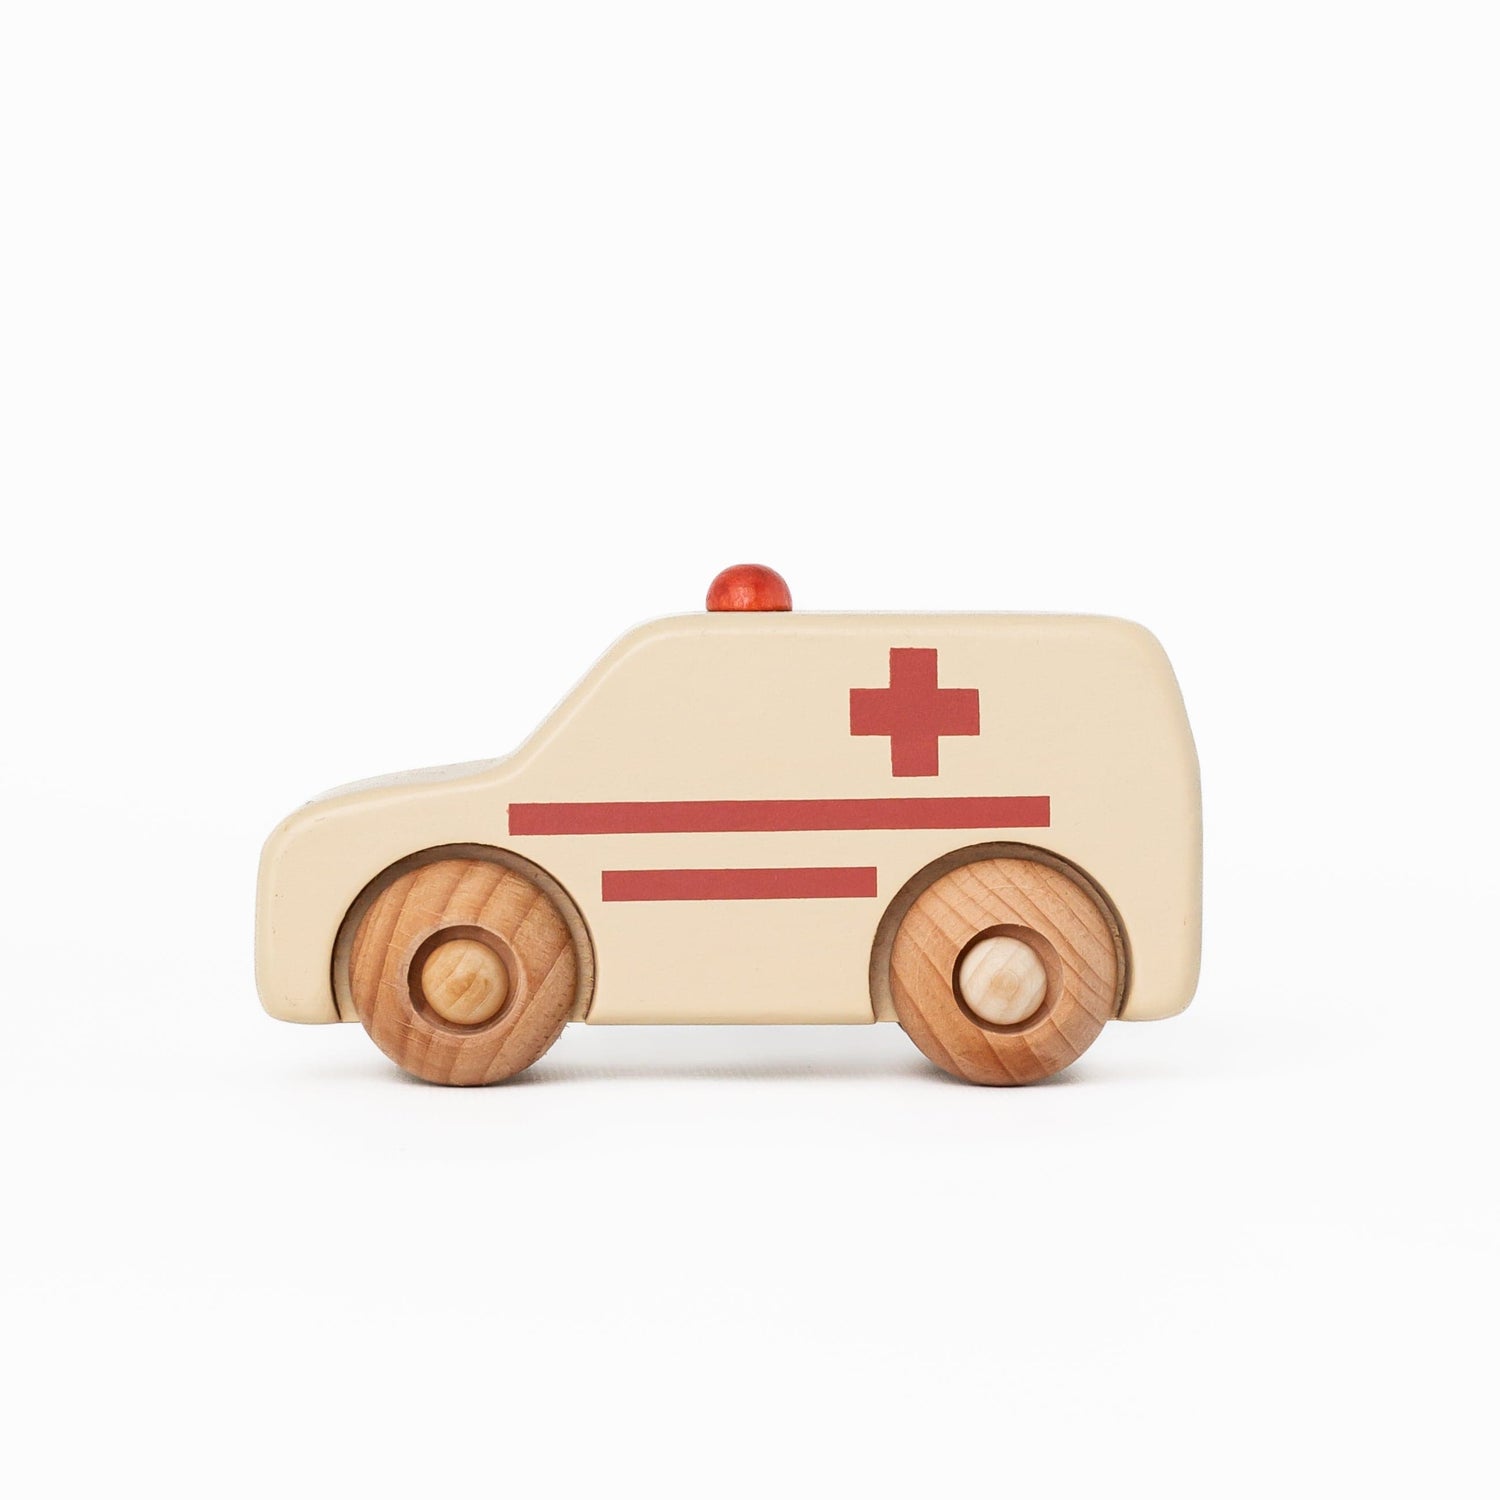 Konges Slojd Things That GO Wooden Toy Ambulance Wooden Toy Ambulance | Toy Ambulance Vehicle